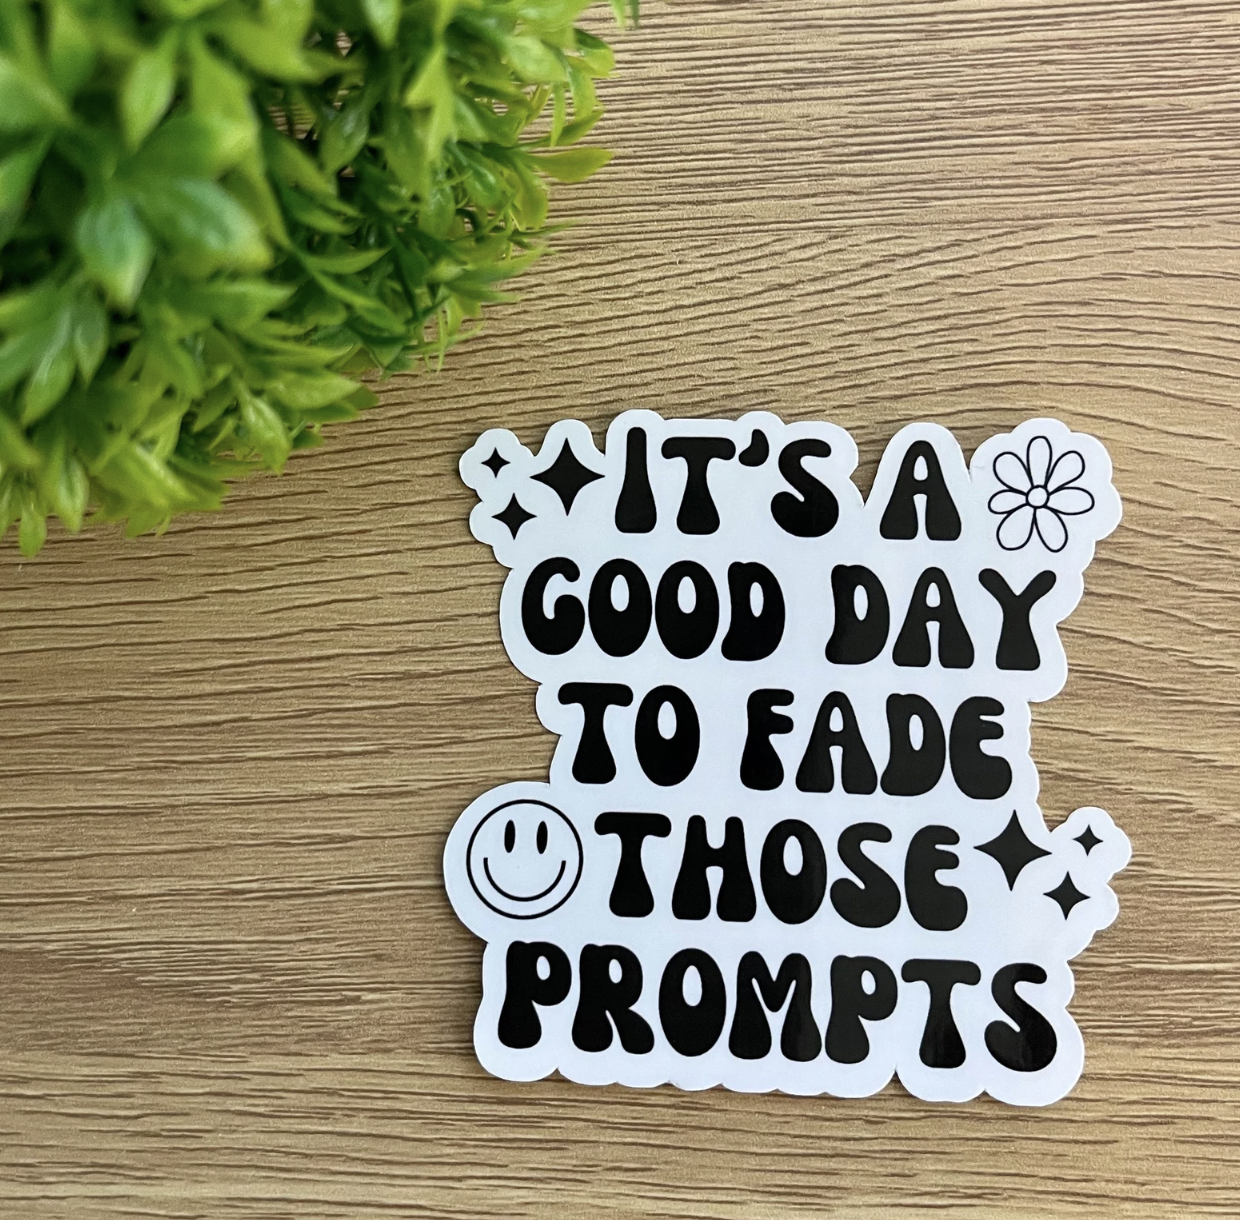 Sticker #112 | Good Day To Fade Prompts Sticker | Laptop & Water Bottle Sticker Decal